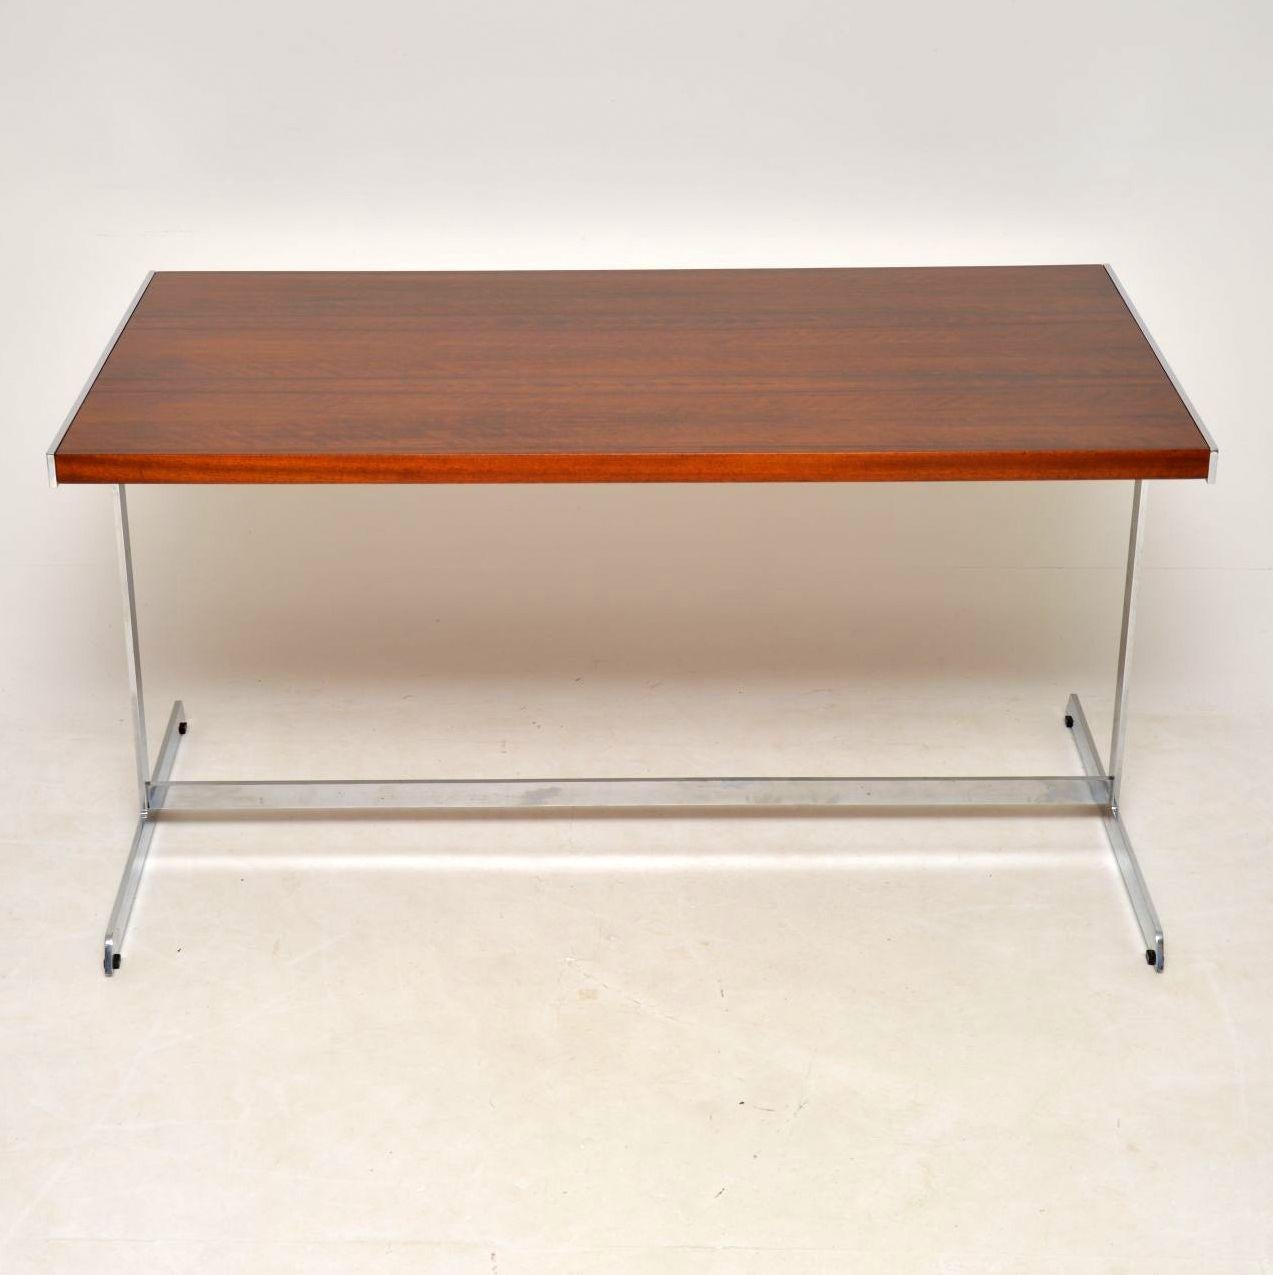 A stunning, top quality and very rare vintage desk or writing table, this was designed by Richard Young and was made by Merrow Associates in the early 1970s. It is extremely well made with a thick, chrome-plated steel frame and beautifully made wood